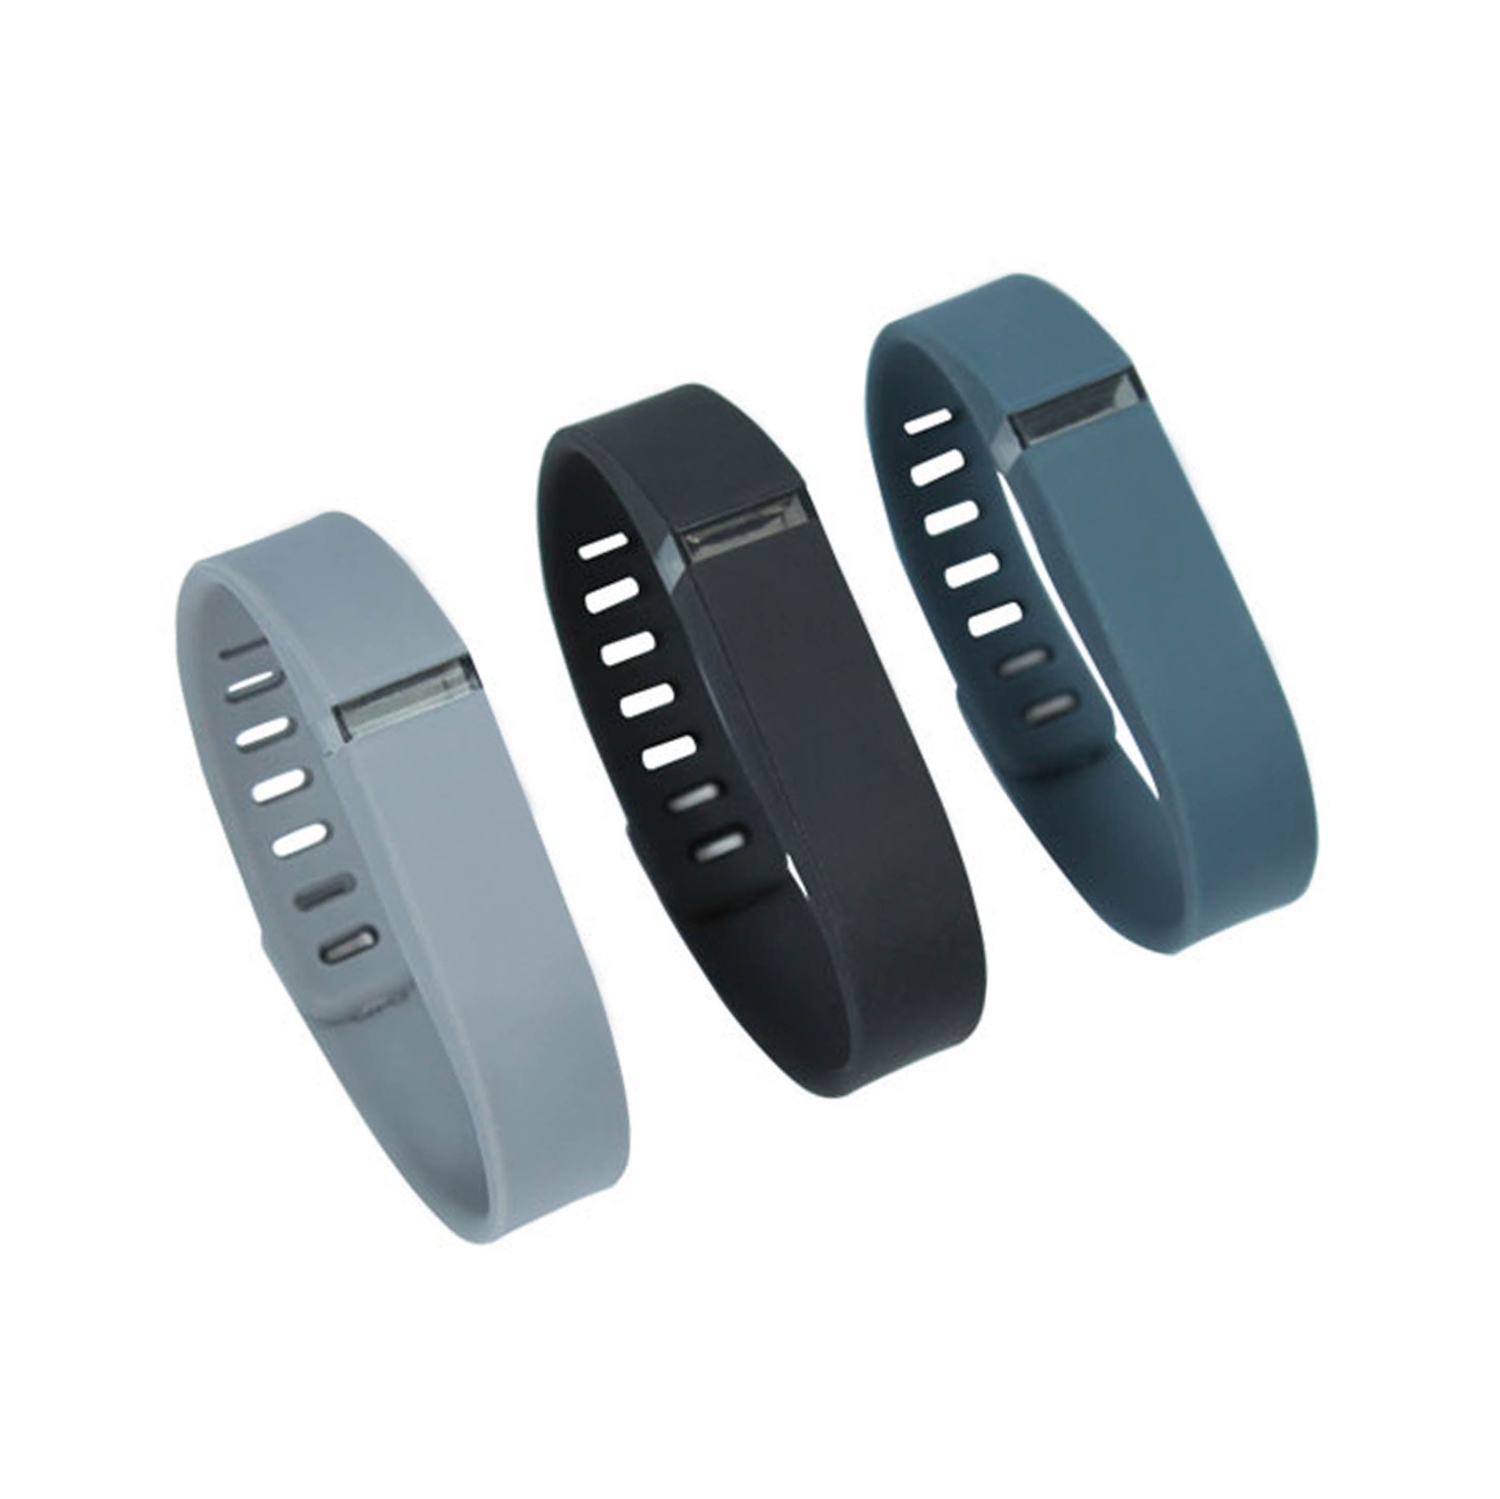 Adreama Silicone Replacement Band for Fitbit Flex - 3 pack (Grey/Black/Dark Teal)